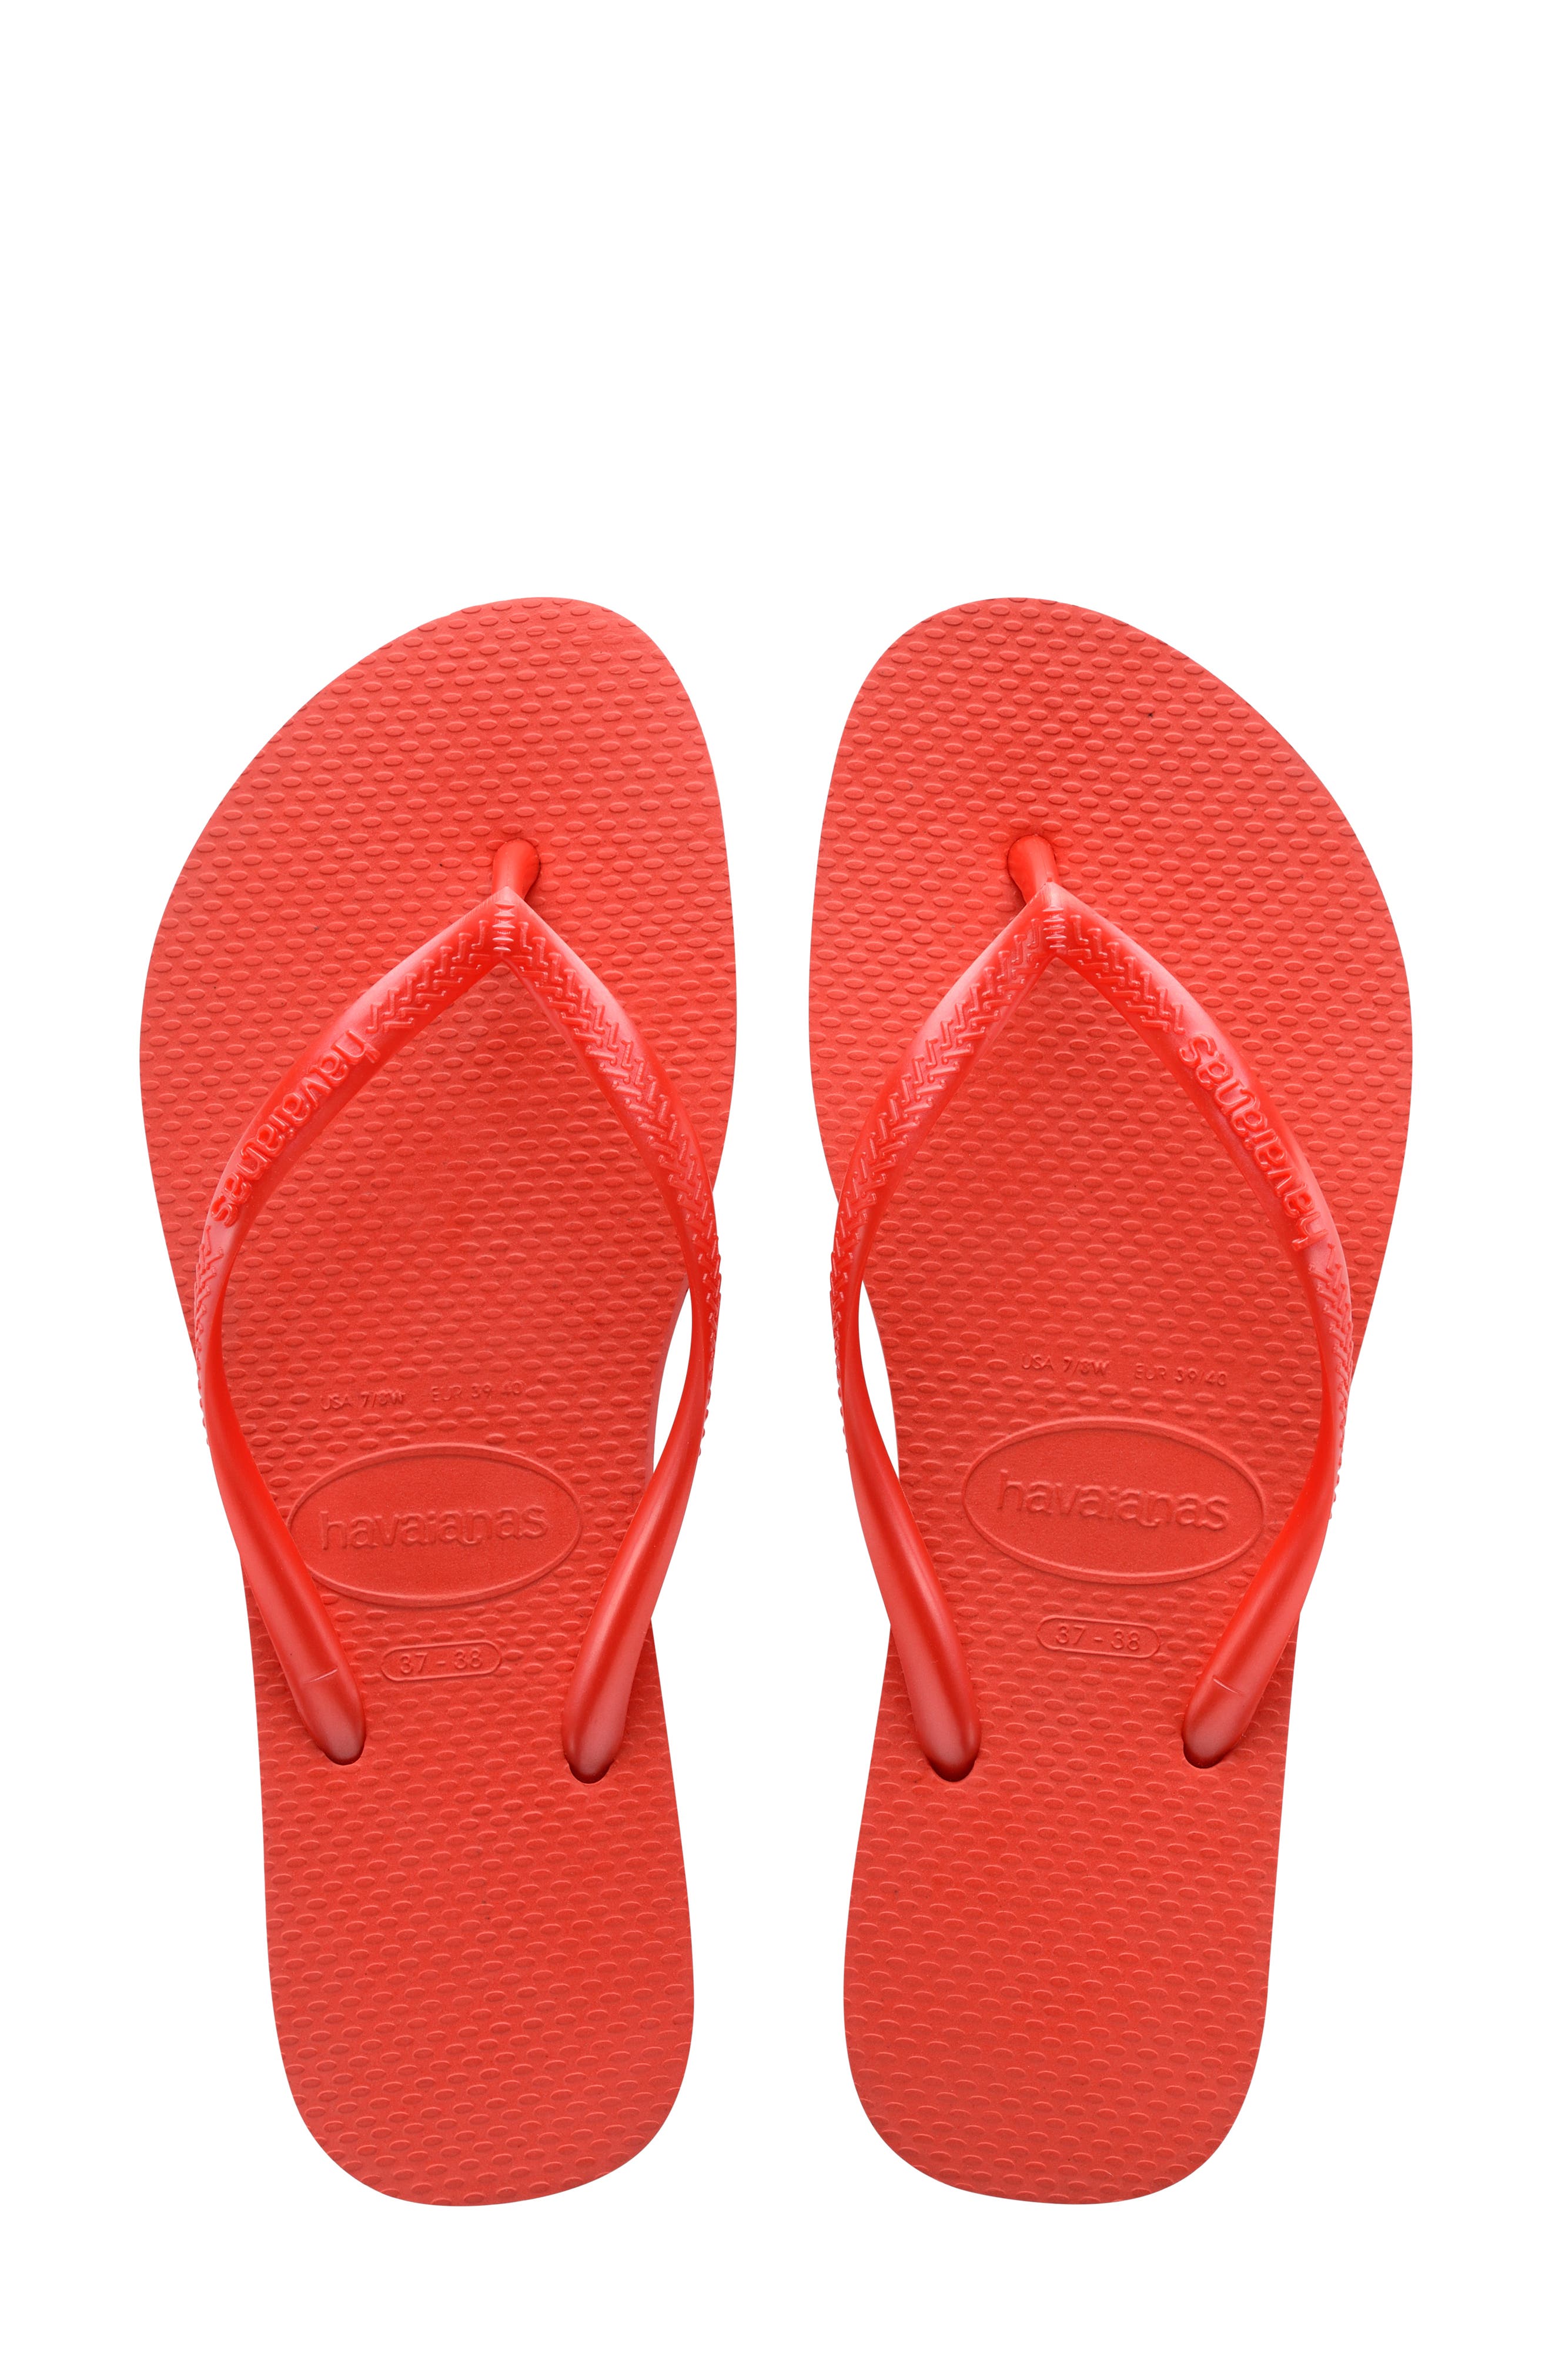 havaianas brands for less